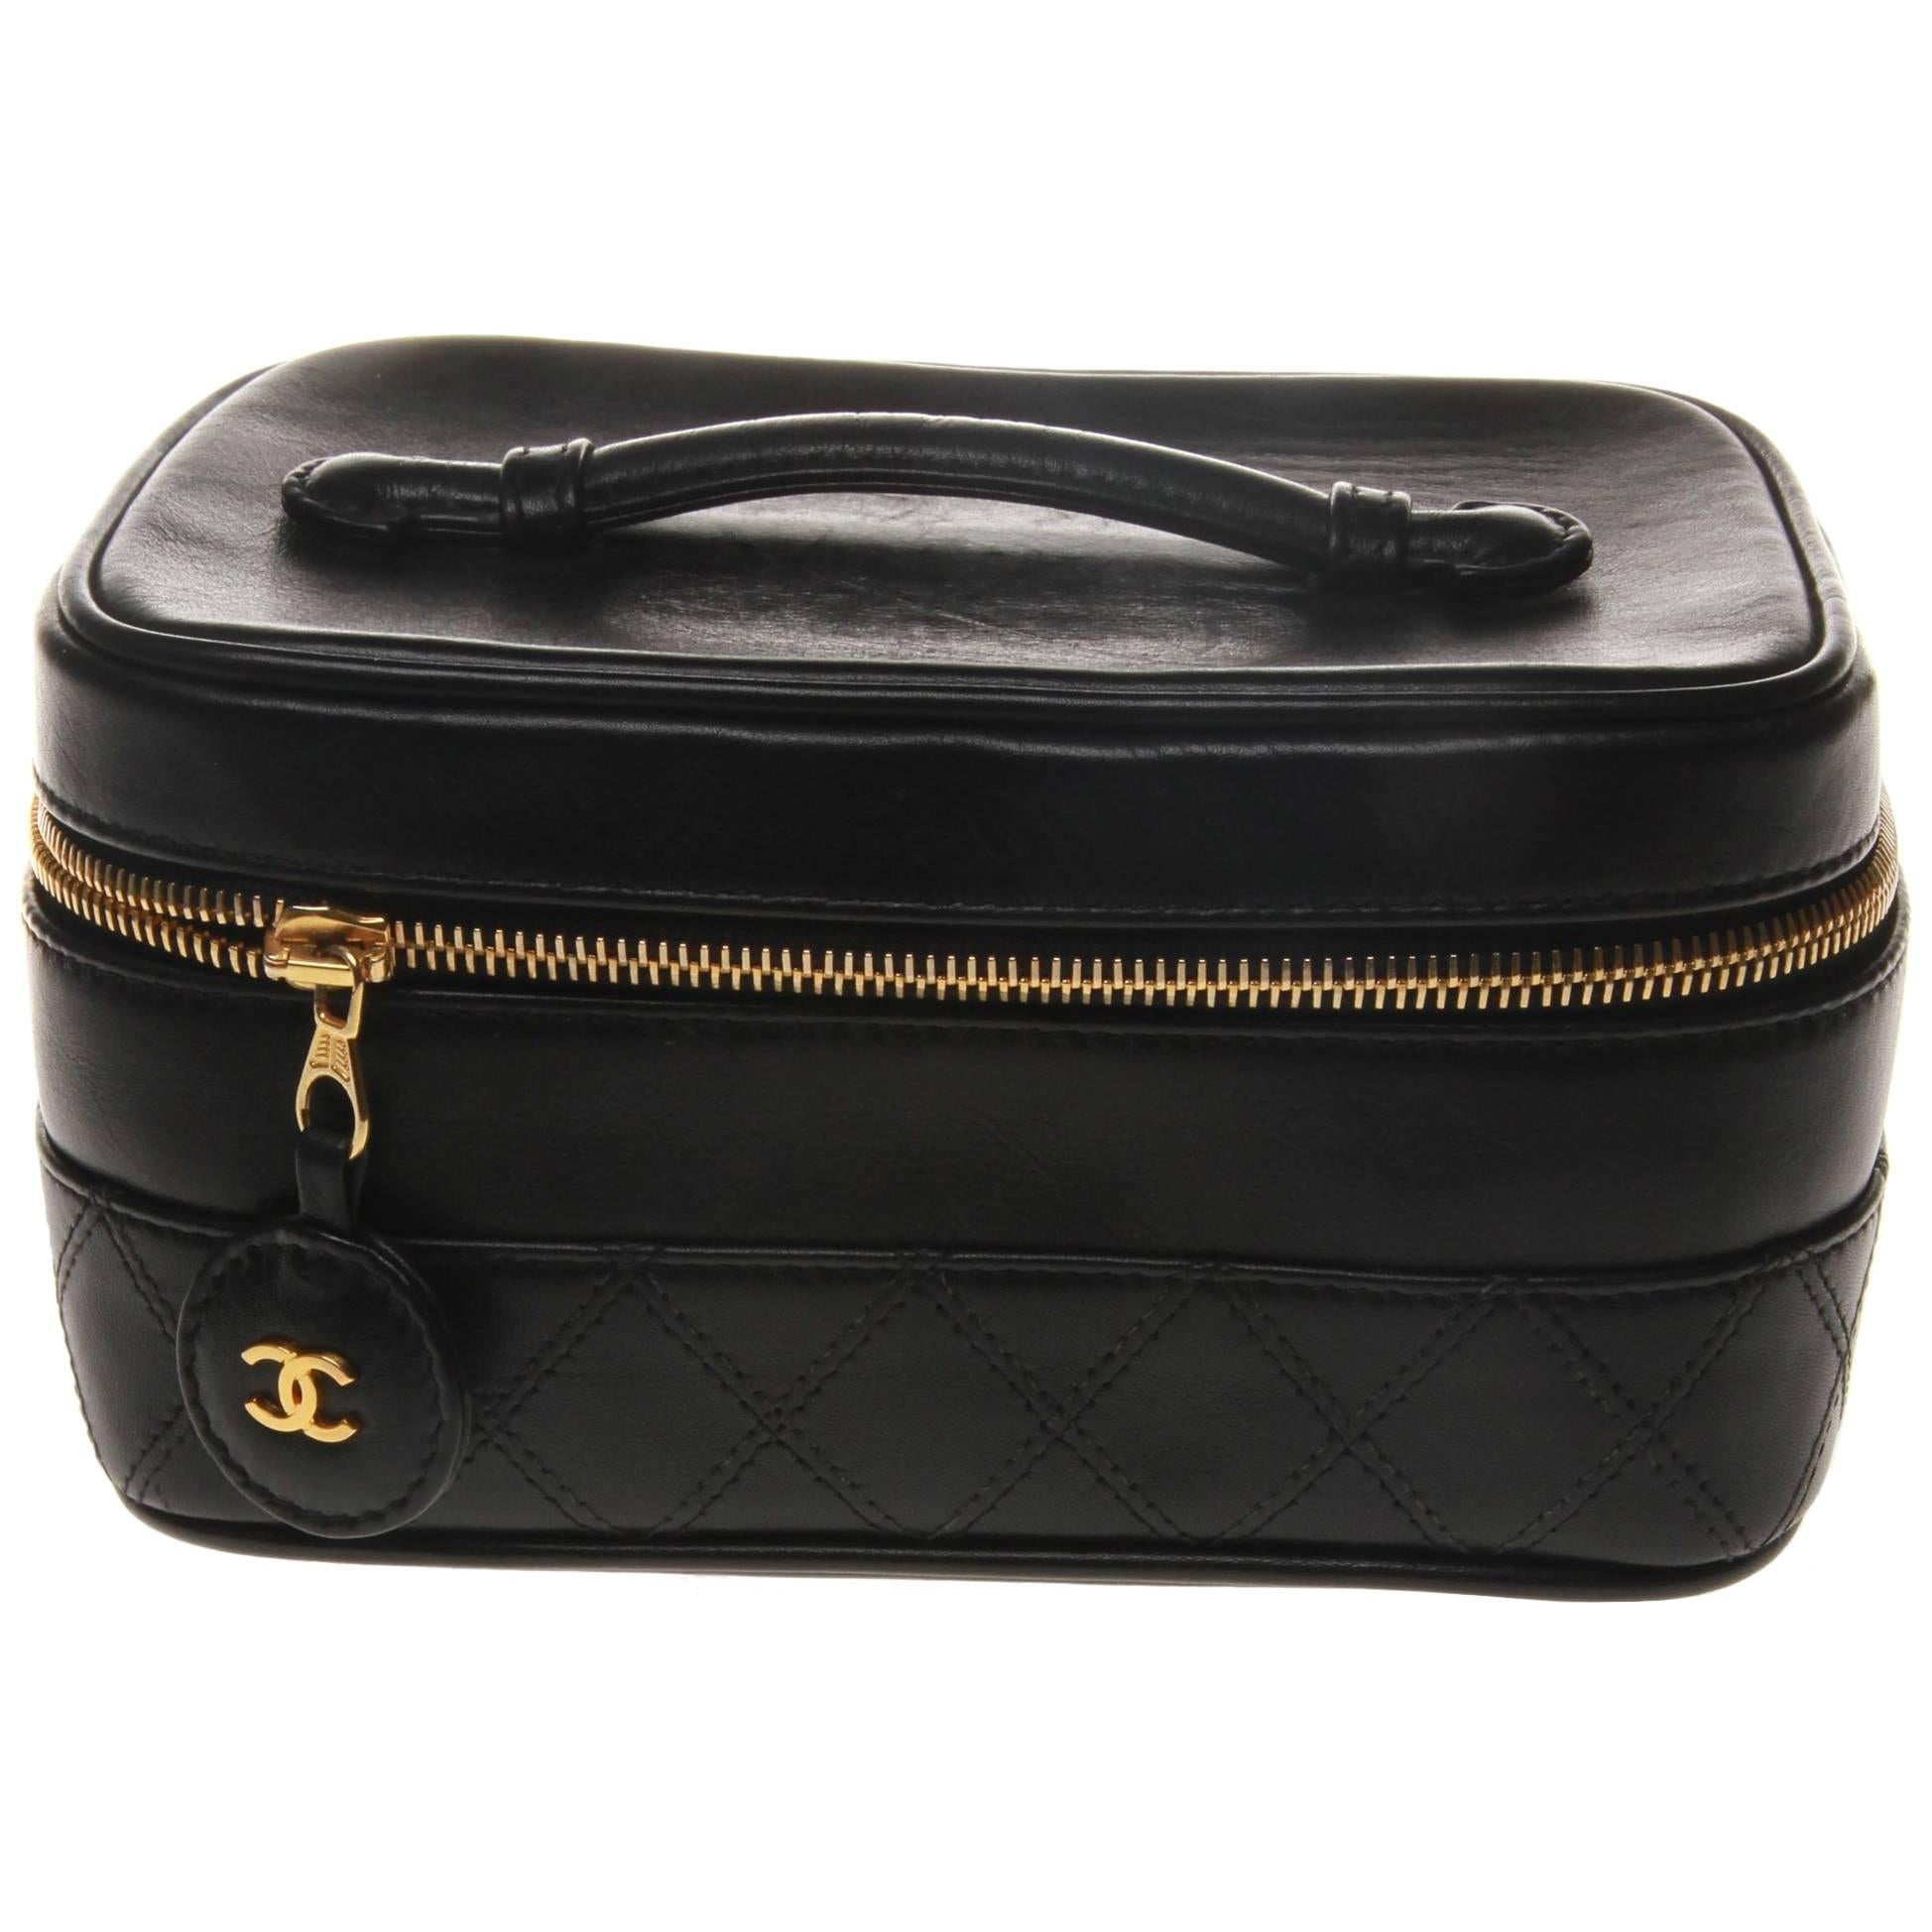 Chanel Leather Beauty Vanity Case Bag